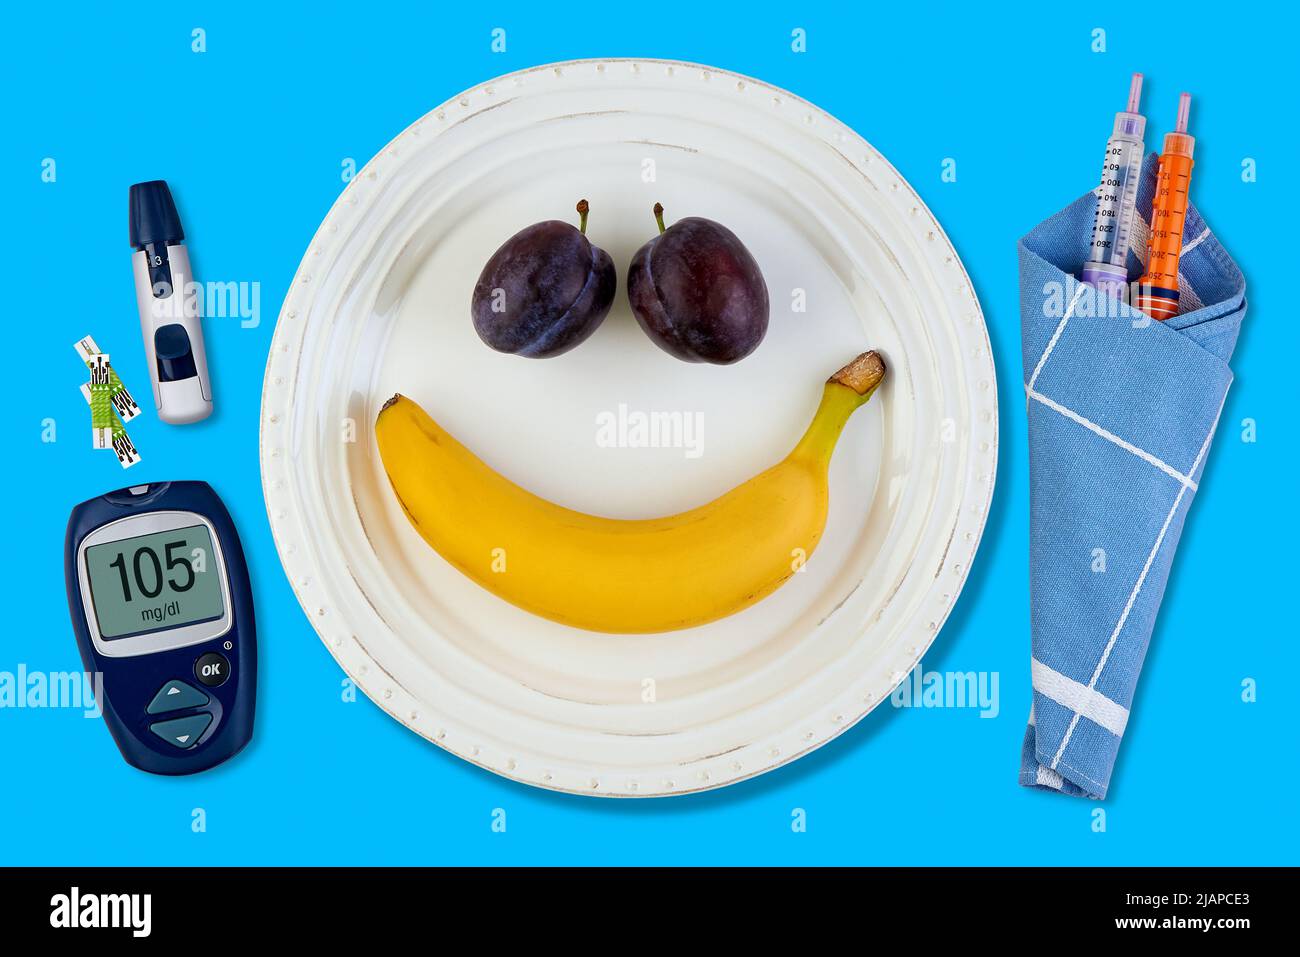 Banana and plum in the form of a smiling emoticon on a white plate and pen for insulin syringes and a blood glucose meter as cutlery on a blue table. Stock Photo